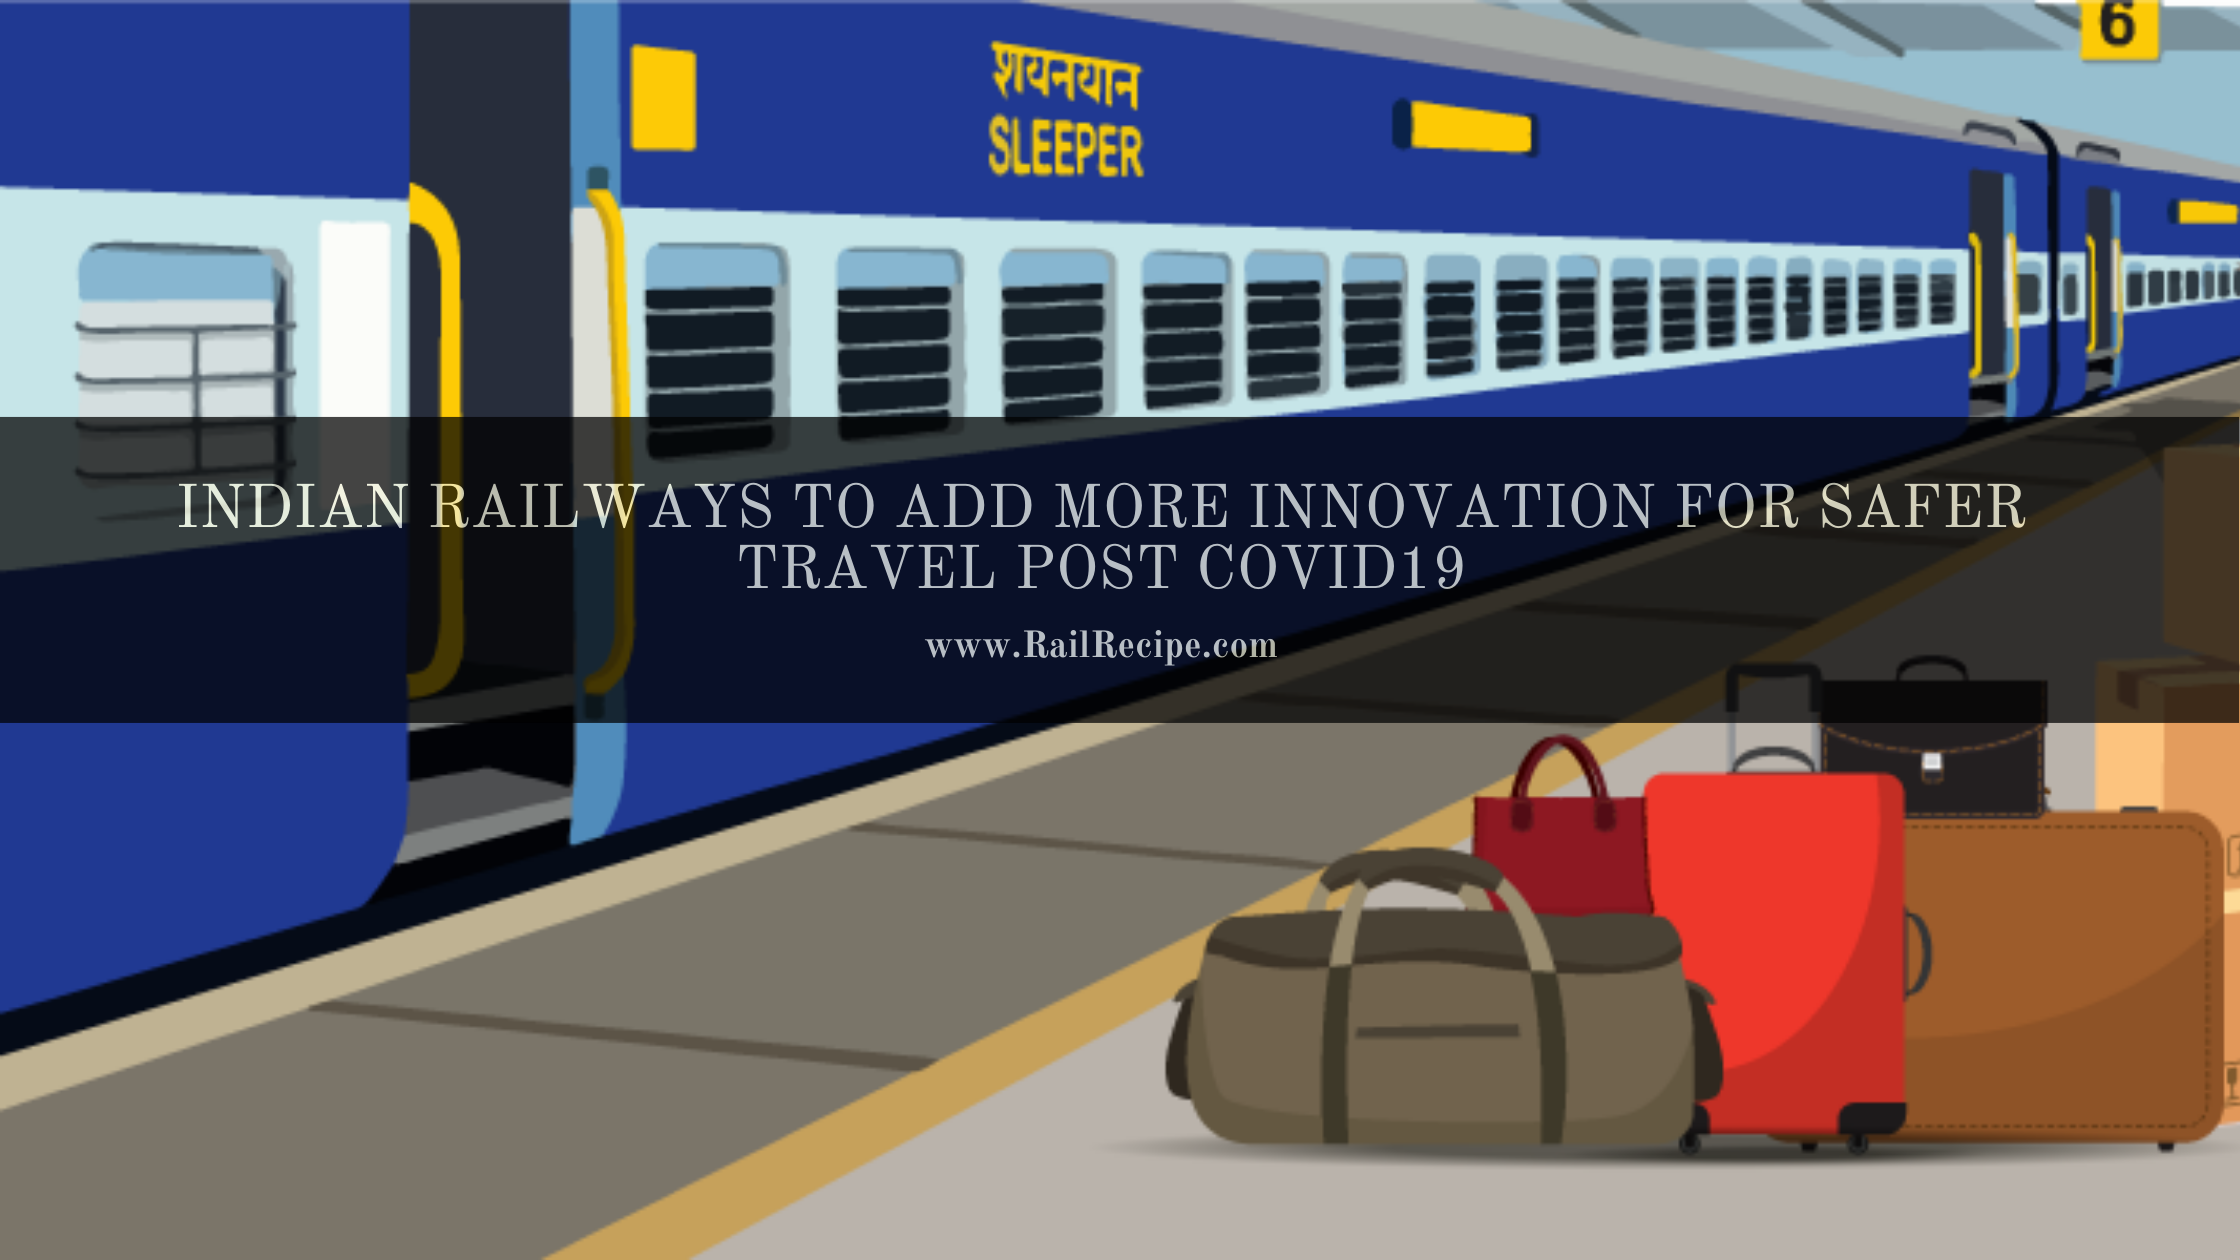 Indian Railways to Add More Innovation for Safer Travel Post COVID19